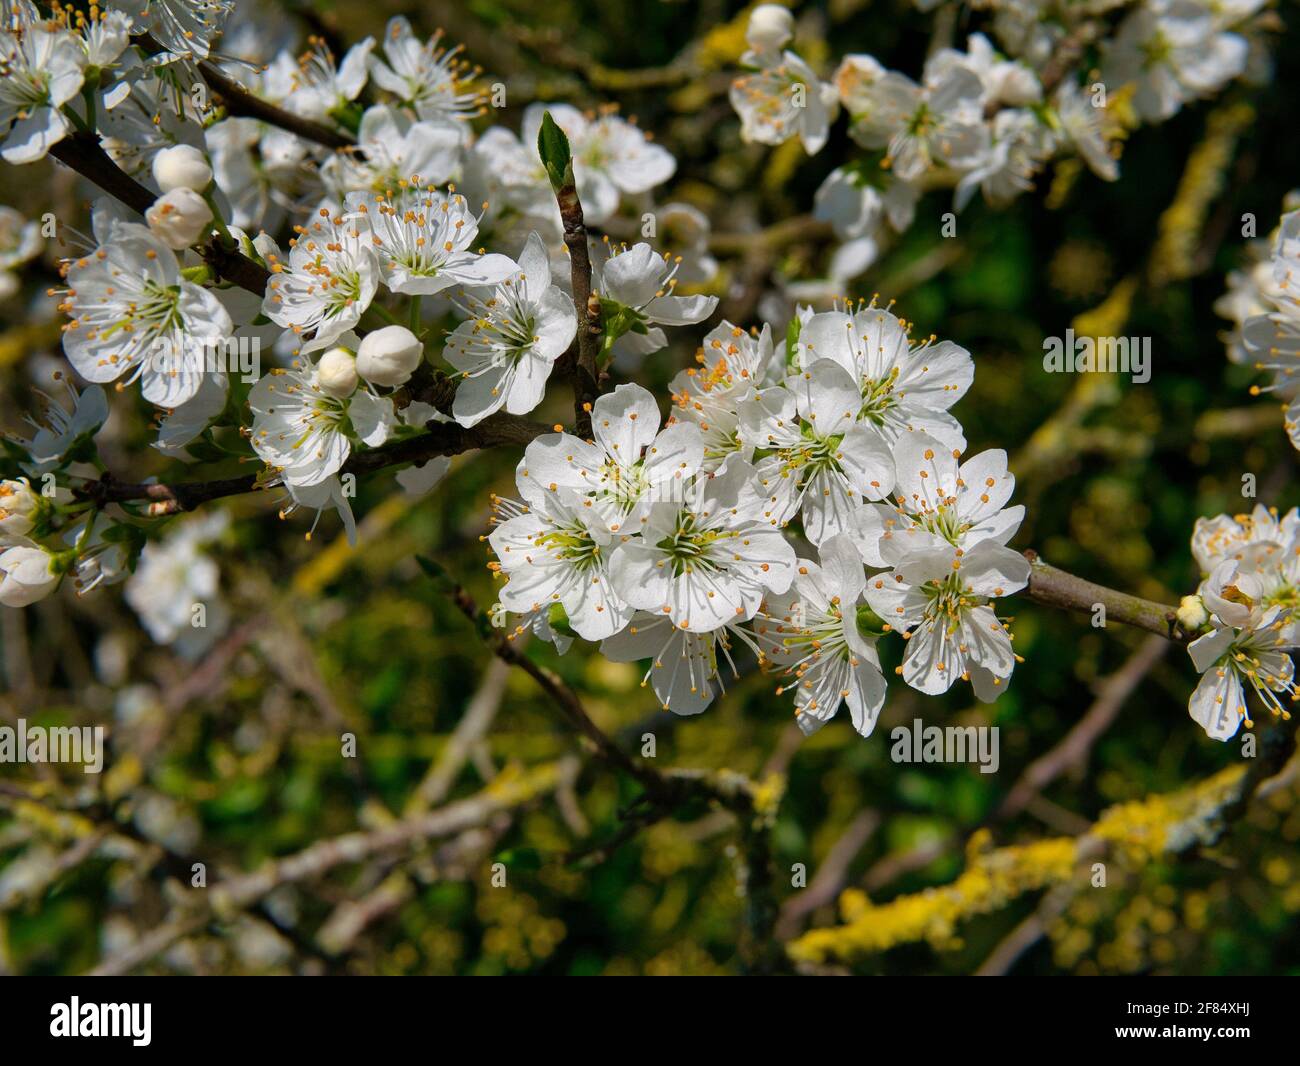 The blossom flowers of a Cambridge Gage plant, showing the petals, anthers held up on filaments and the stamens. Taken on a sunny day in spring. Stock Photo